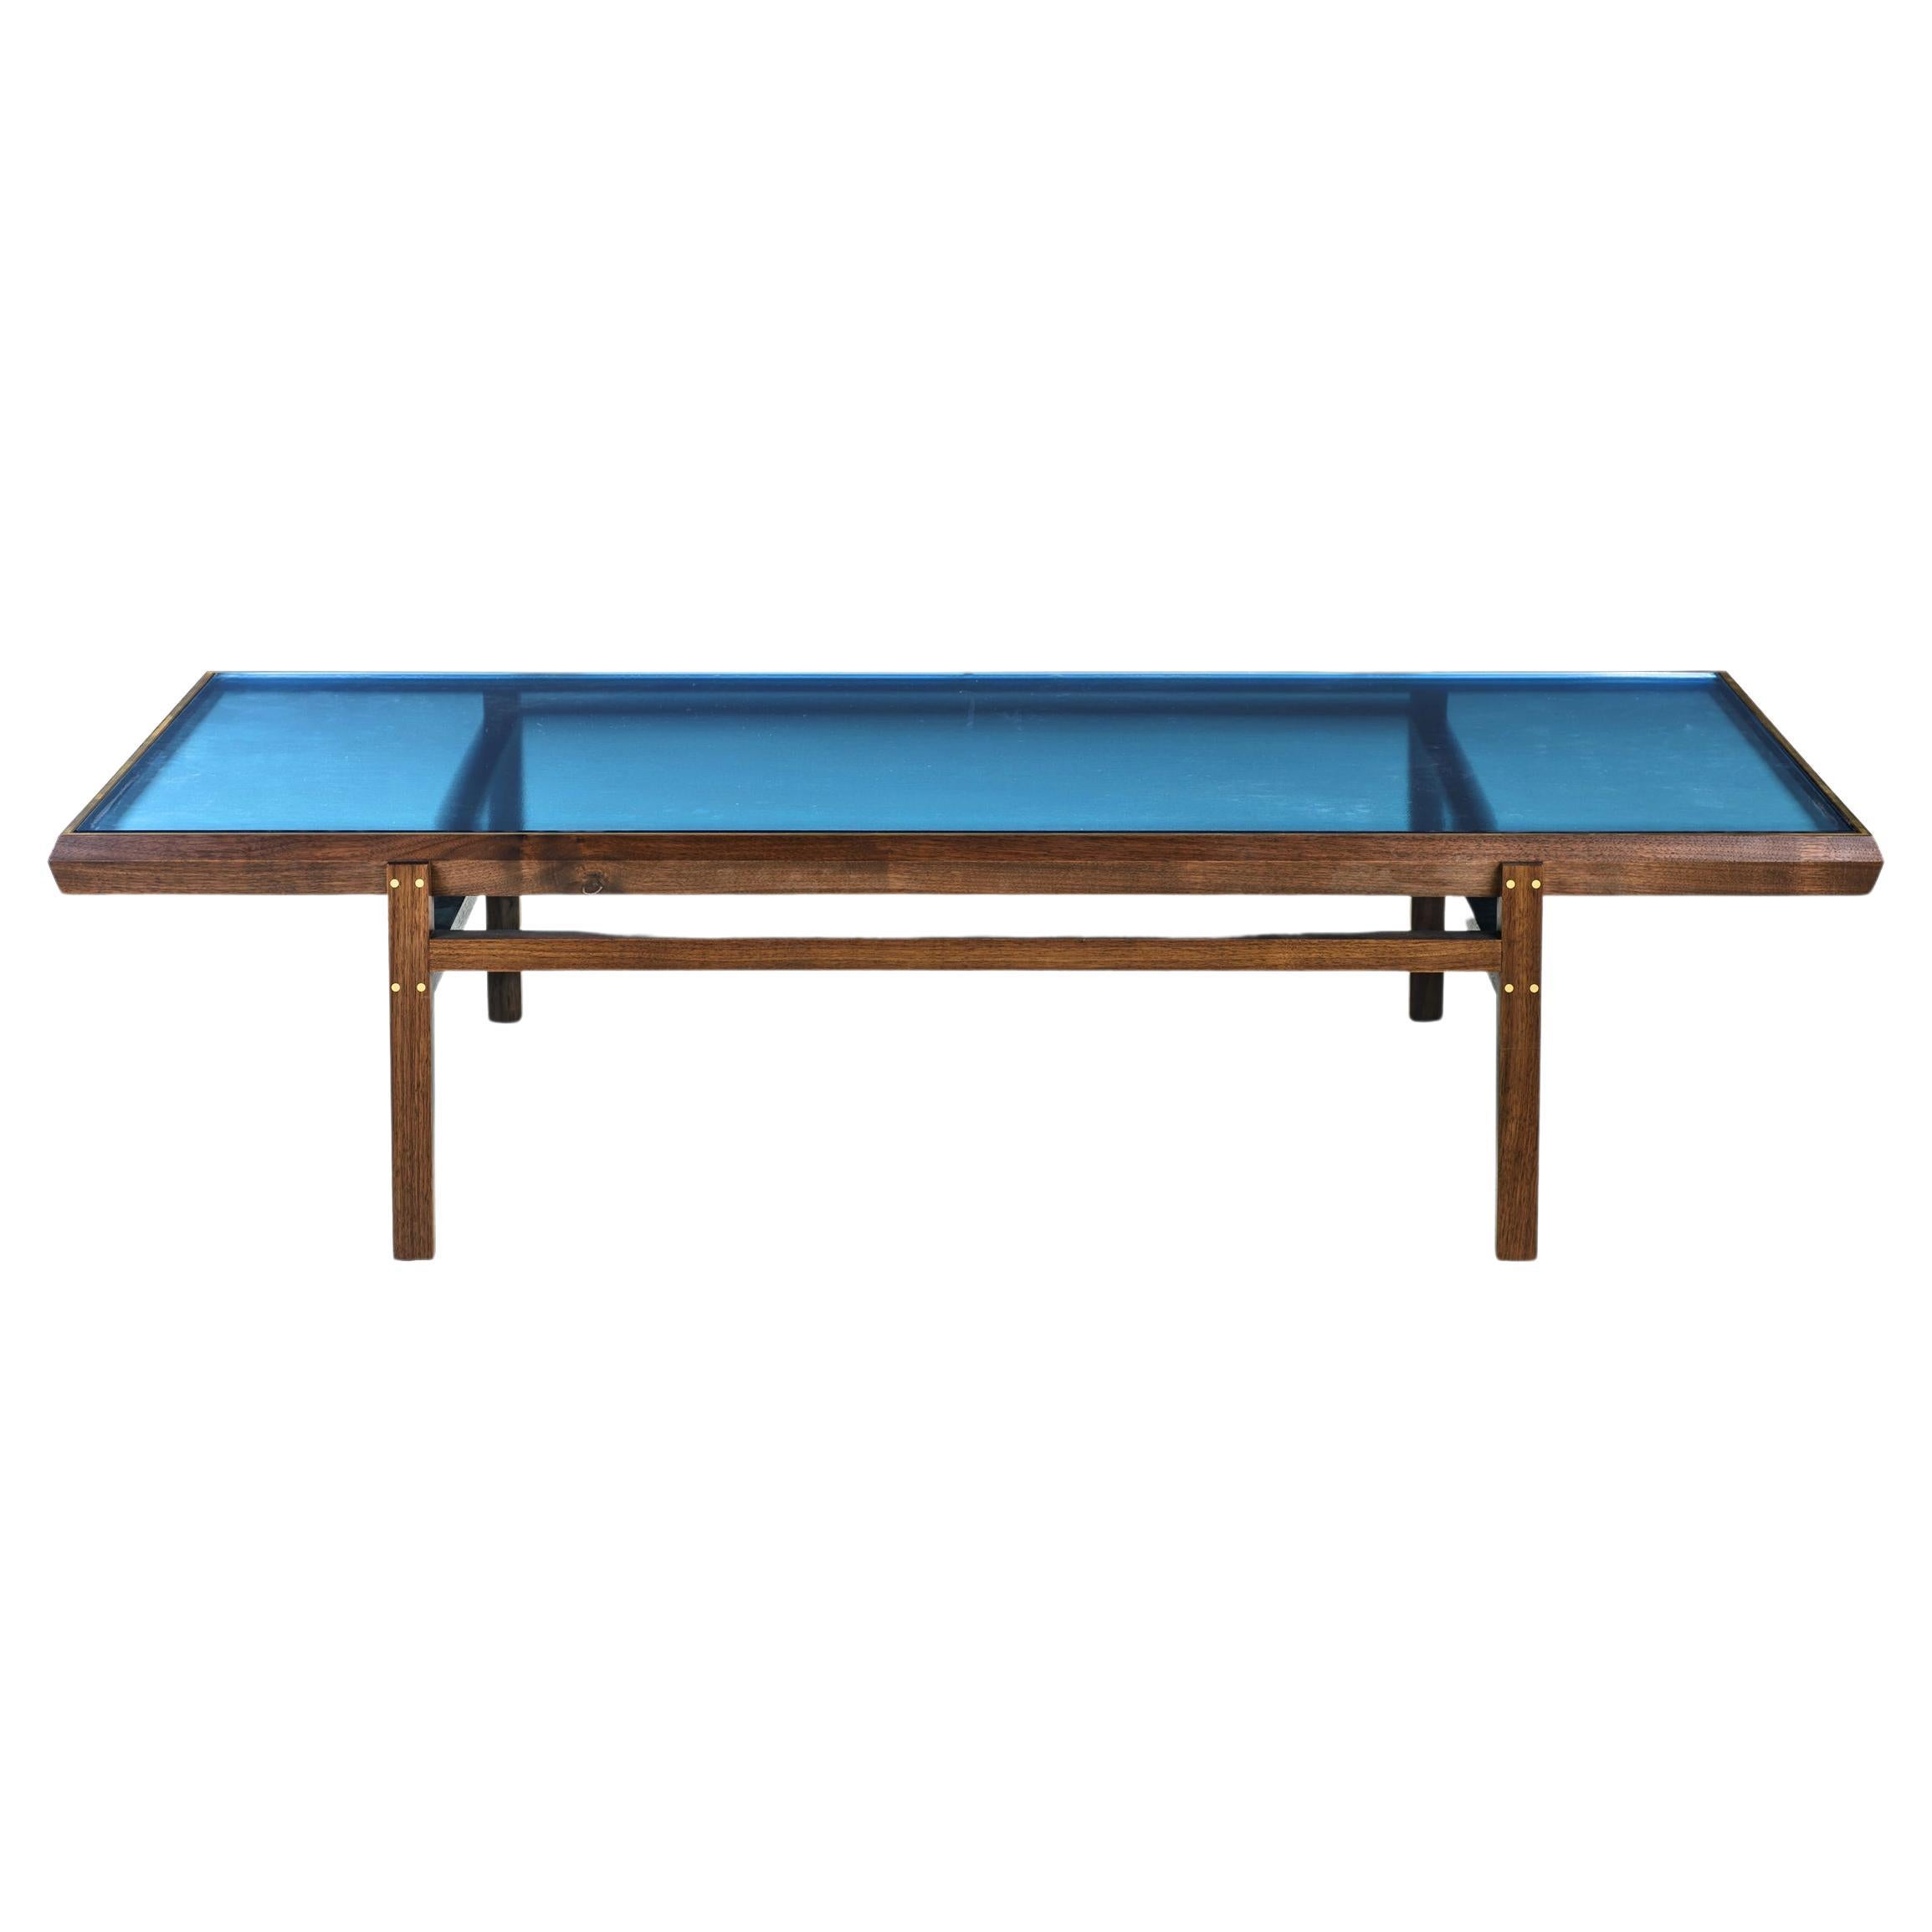 KGBL Pintor Coffee Table For Sale